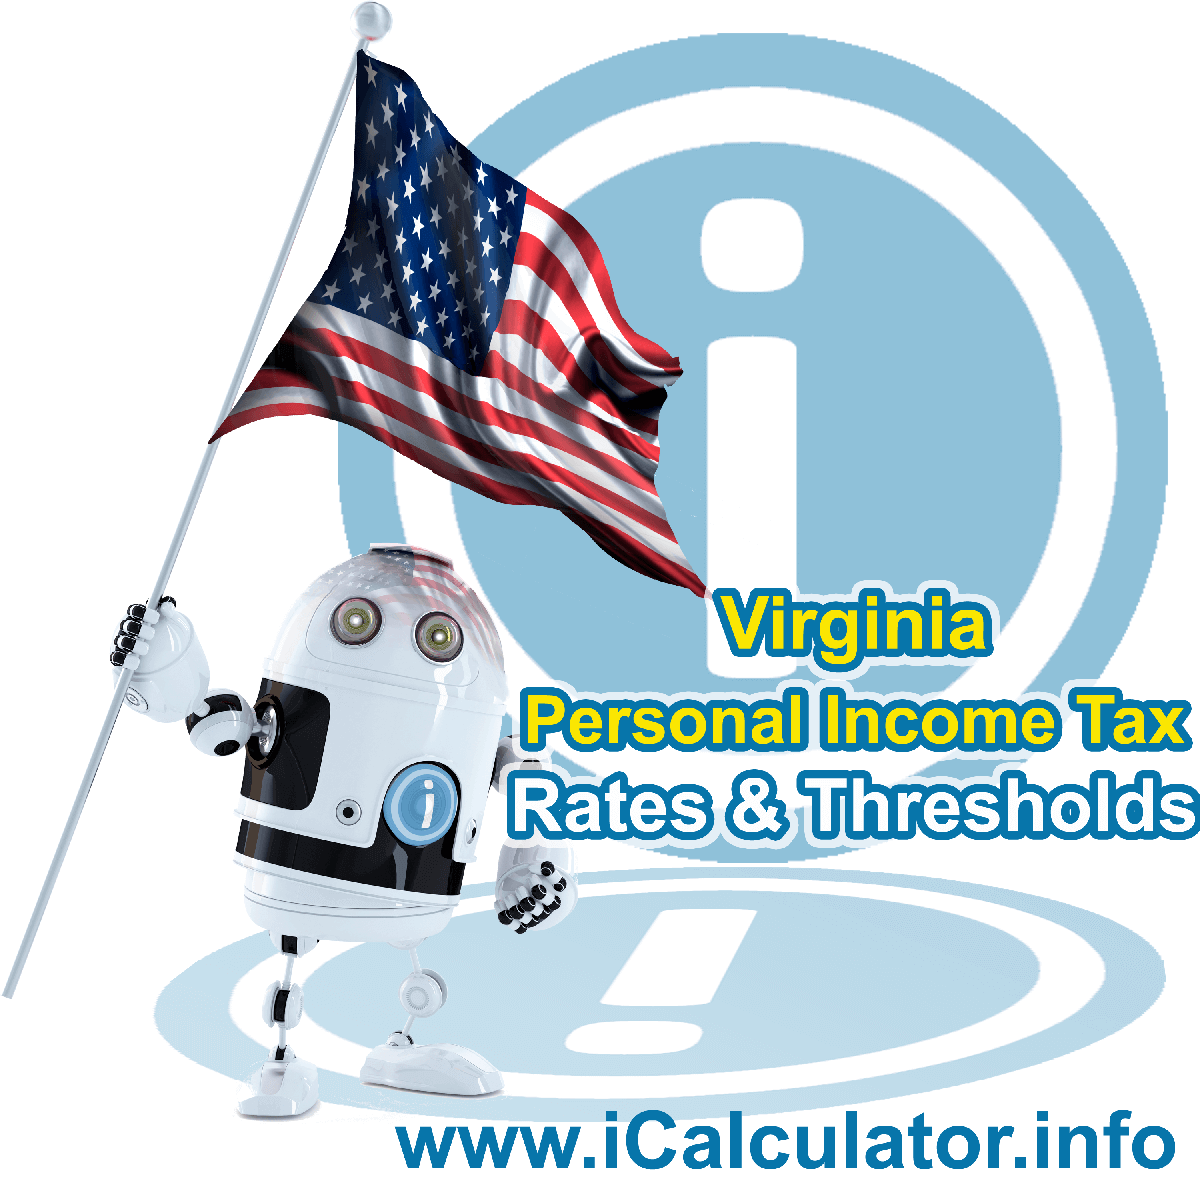 Virginia State Tax Tables 2020. This image displays details of the Virginia State Tax Tables for the 2020 tax return year which is provided in support of the 2020 US Tax Calculator